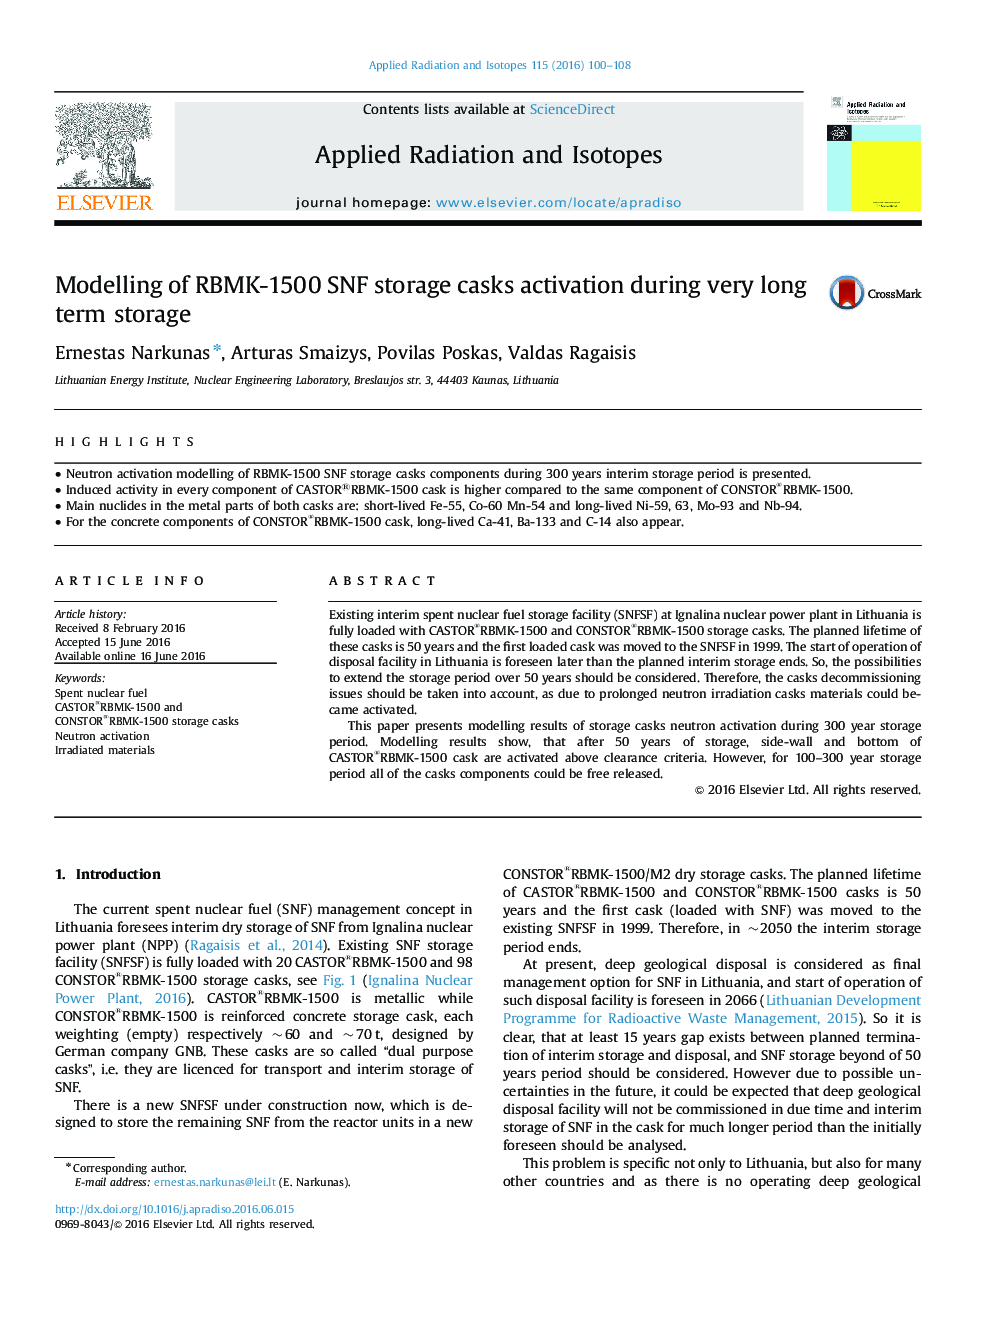 Modelling of RBMK-1500 SNF storage casks activation during very long term storage